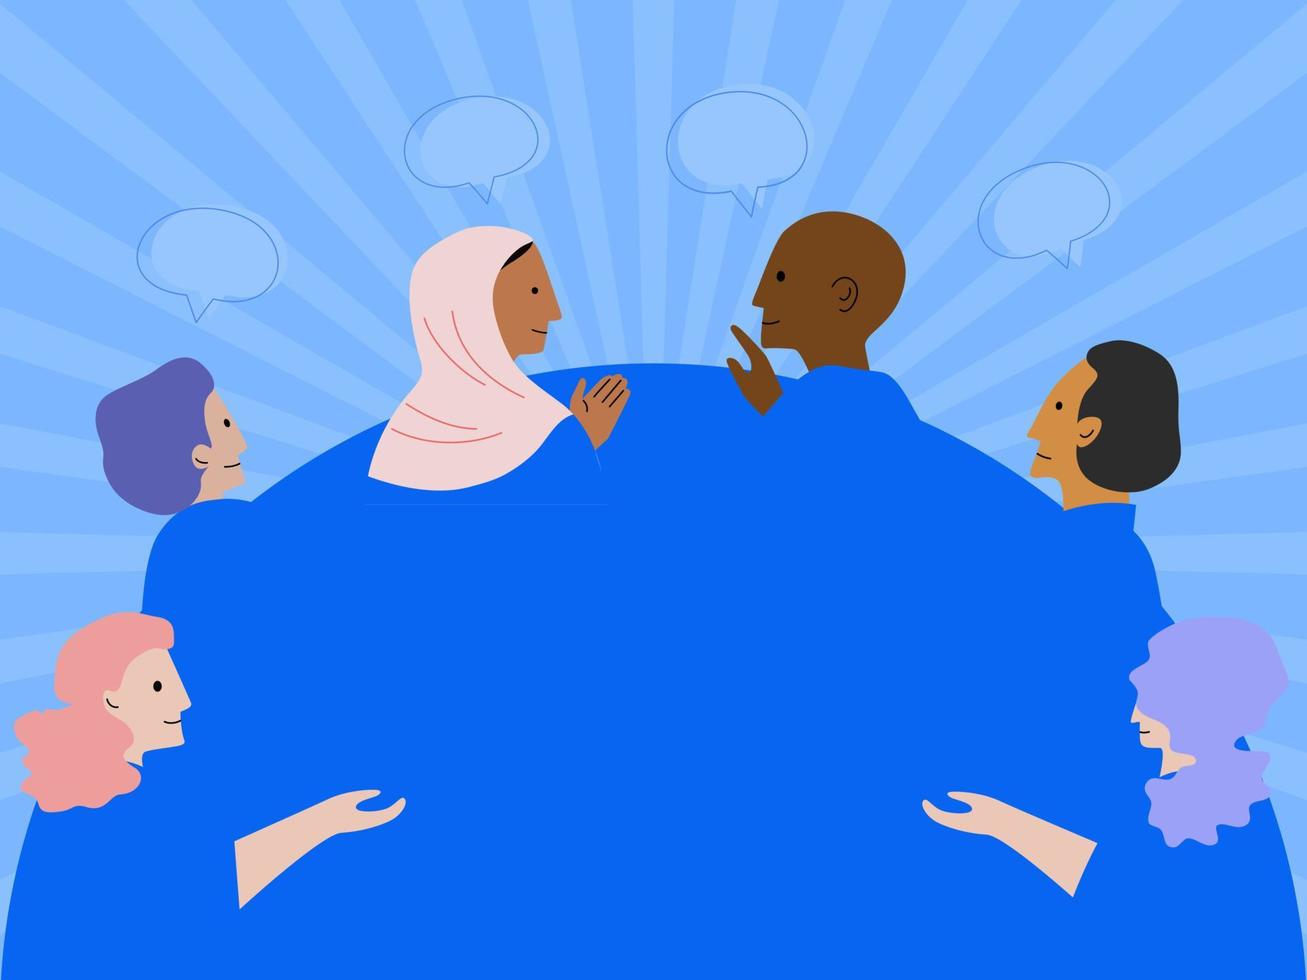 Background of talking people around the world, friendship and community concept. Flat vector illustration.